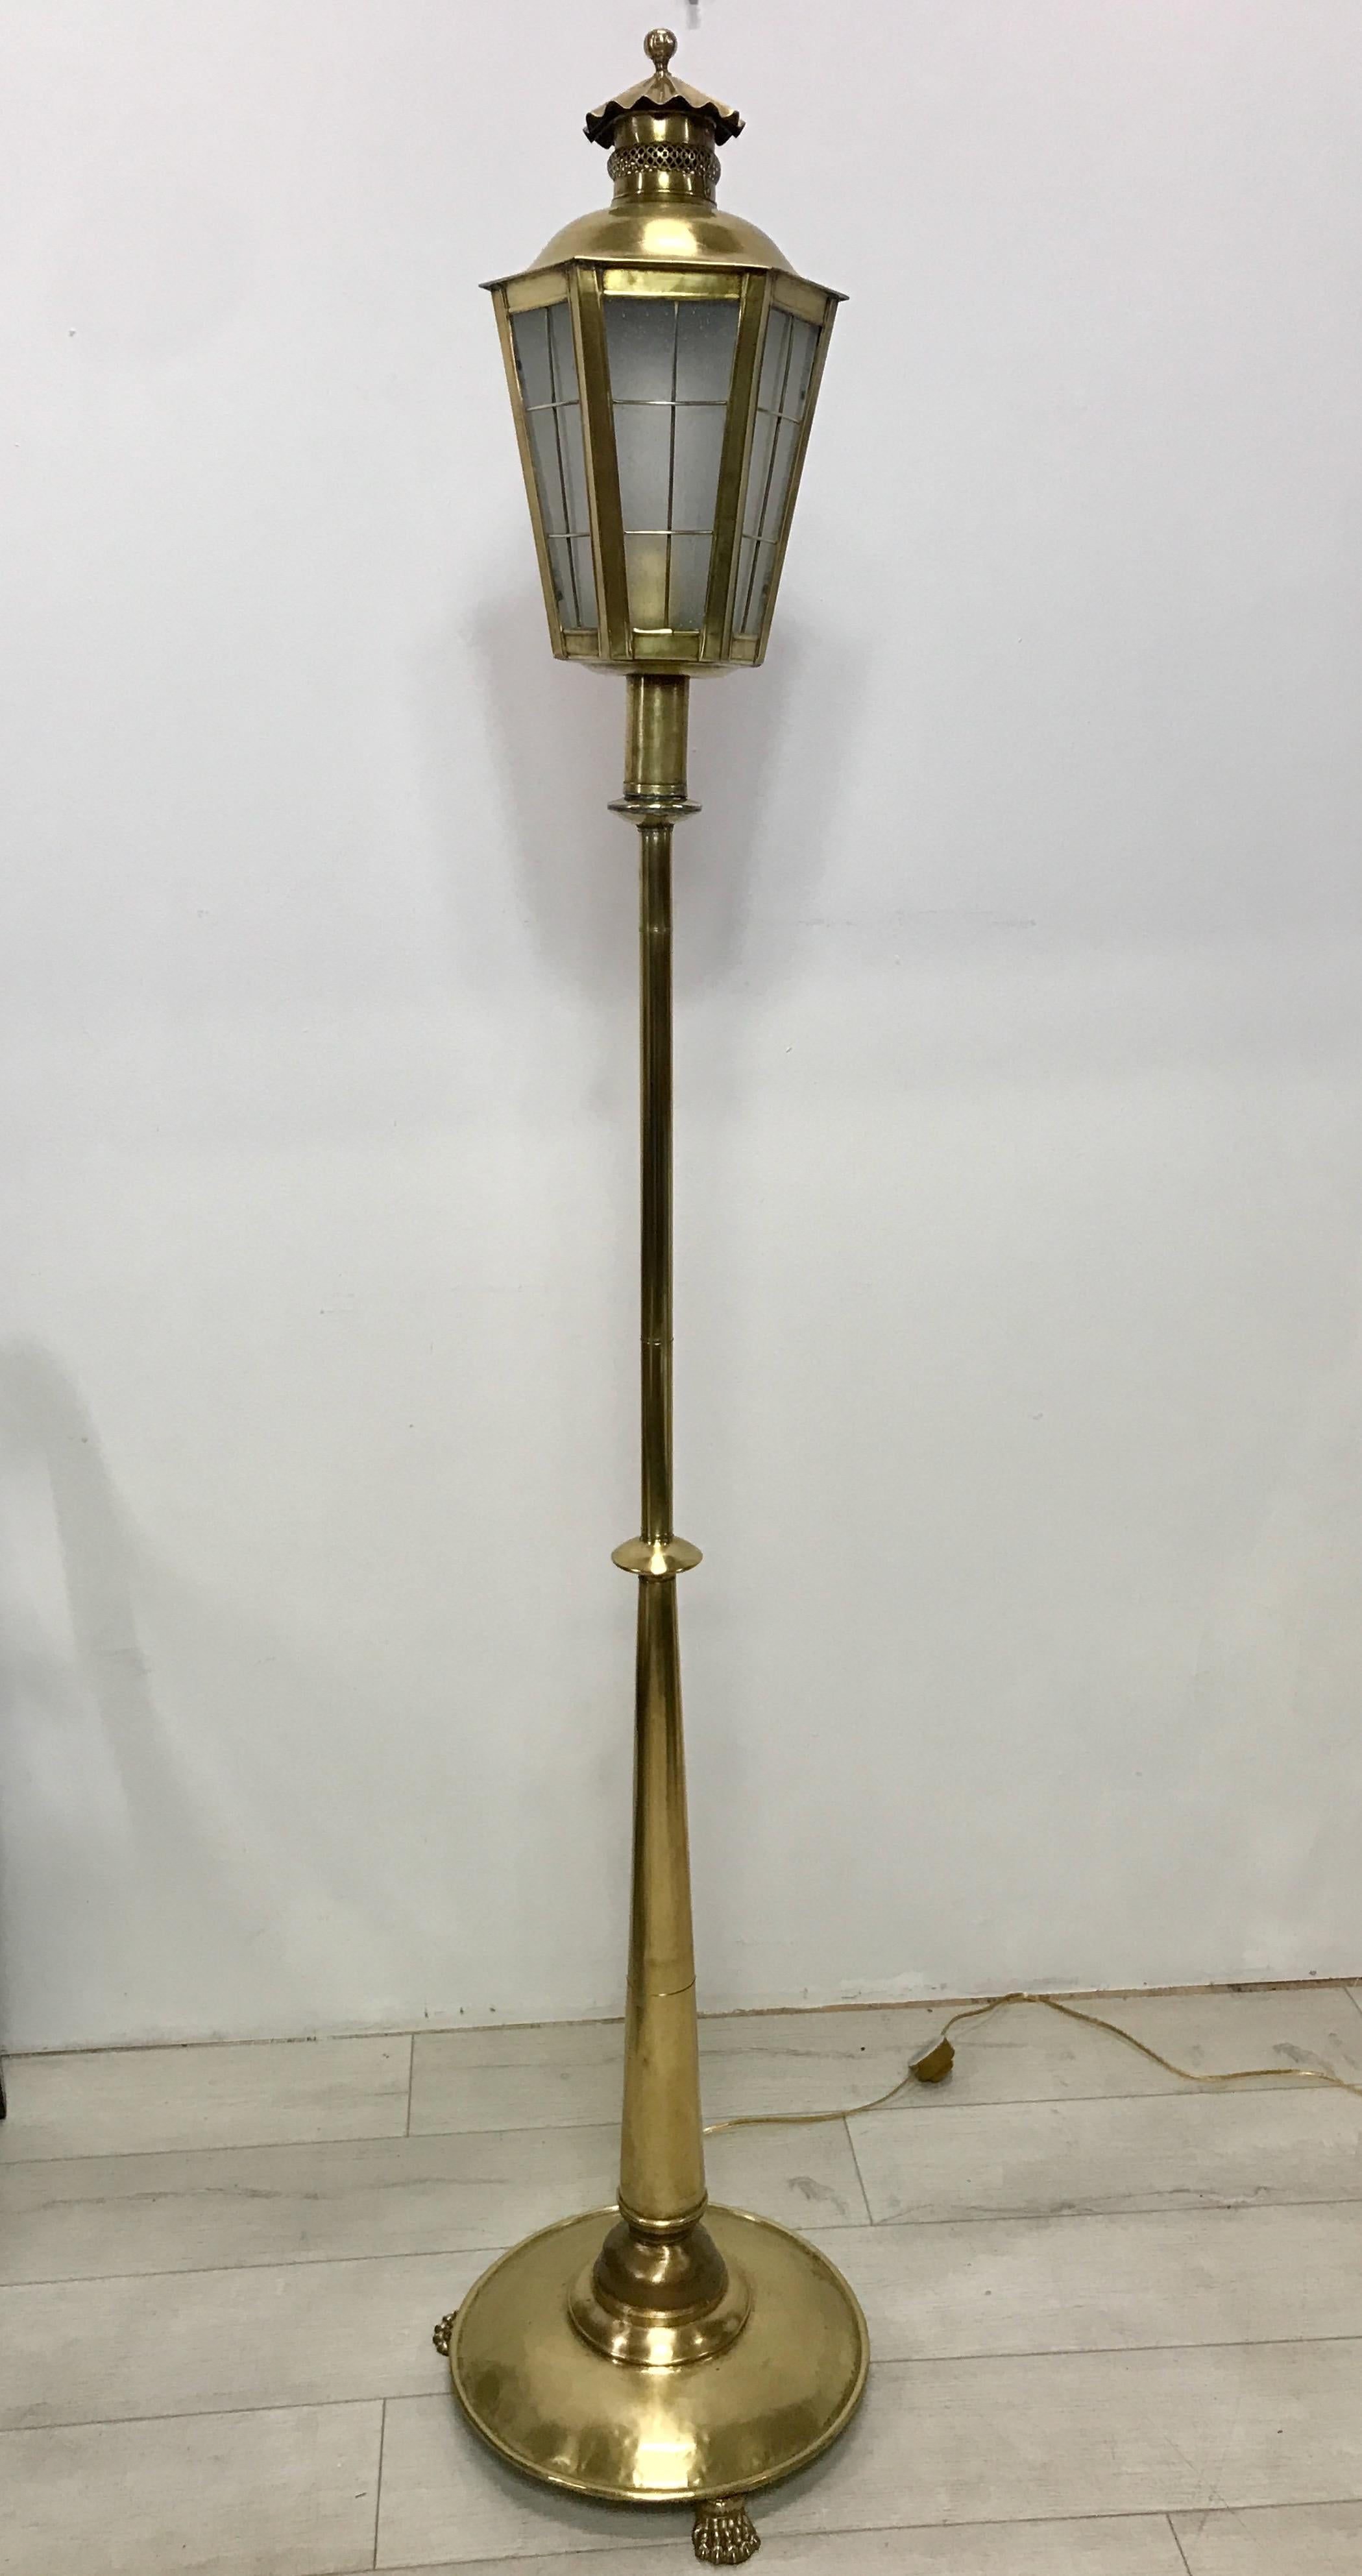 Unusual brass lantern floor lamp, originally a candle lantern now converted to electric, holds a single standard size bulb.
Solid brass (not plated).
England, 19th century.
    